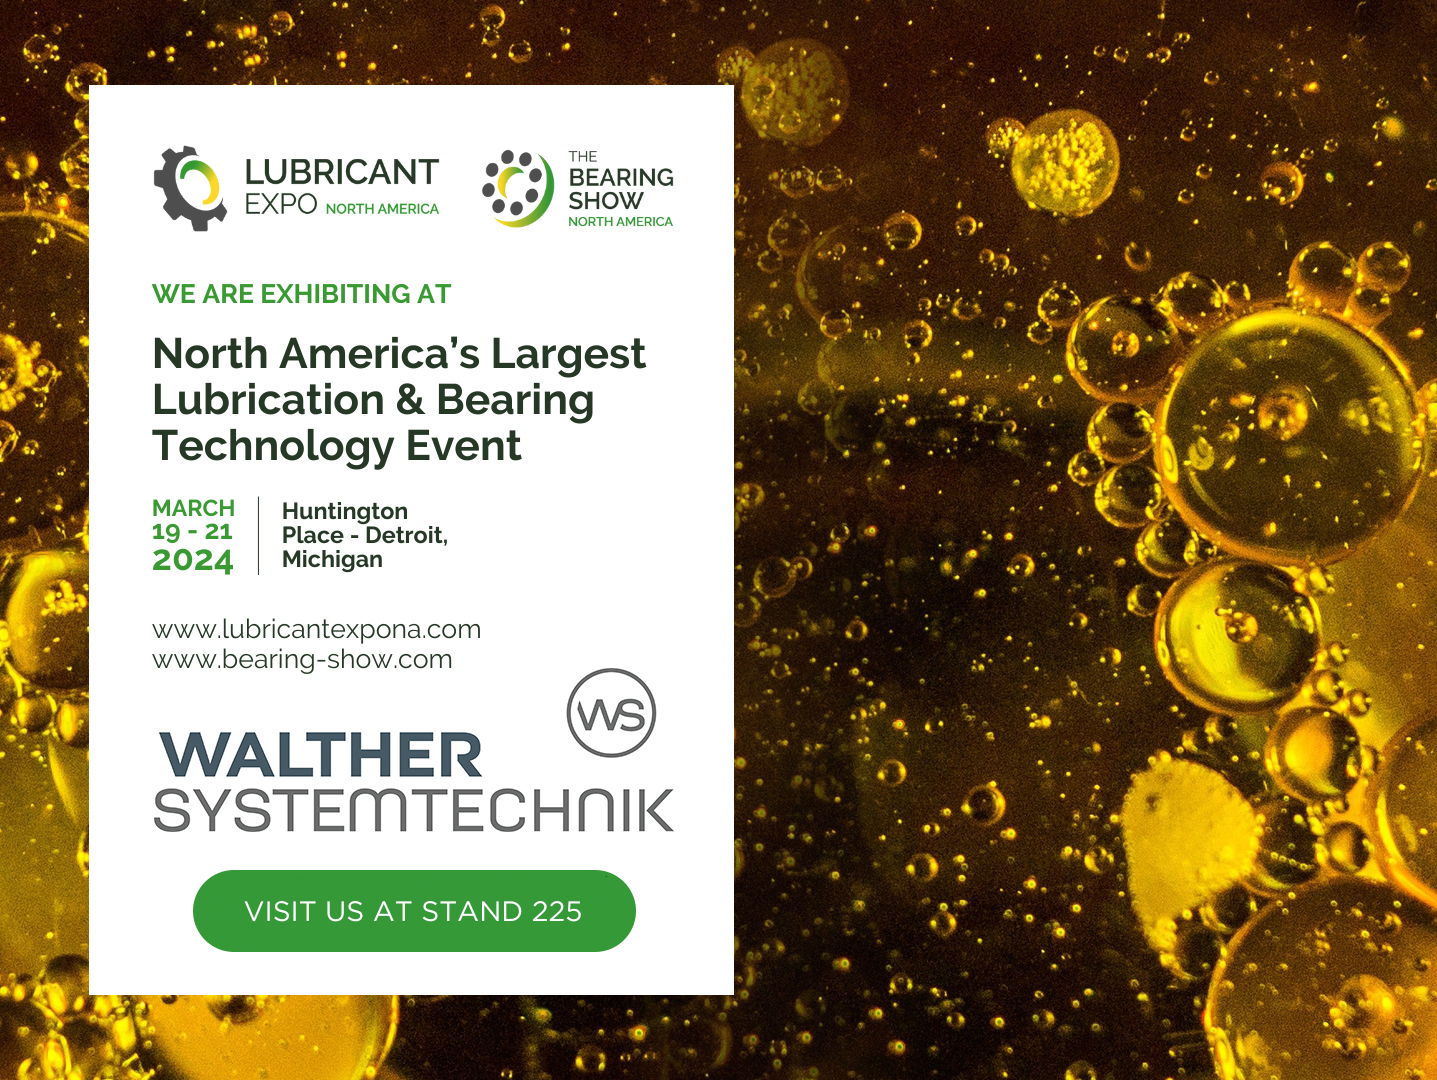 Specialising in the lubricant industry: Lubricant Expo North America 2024